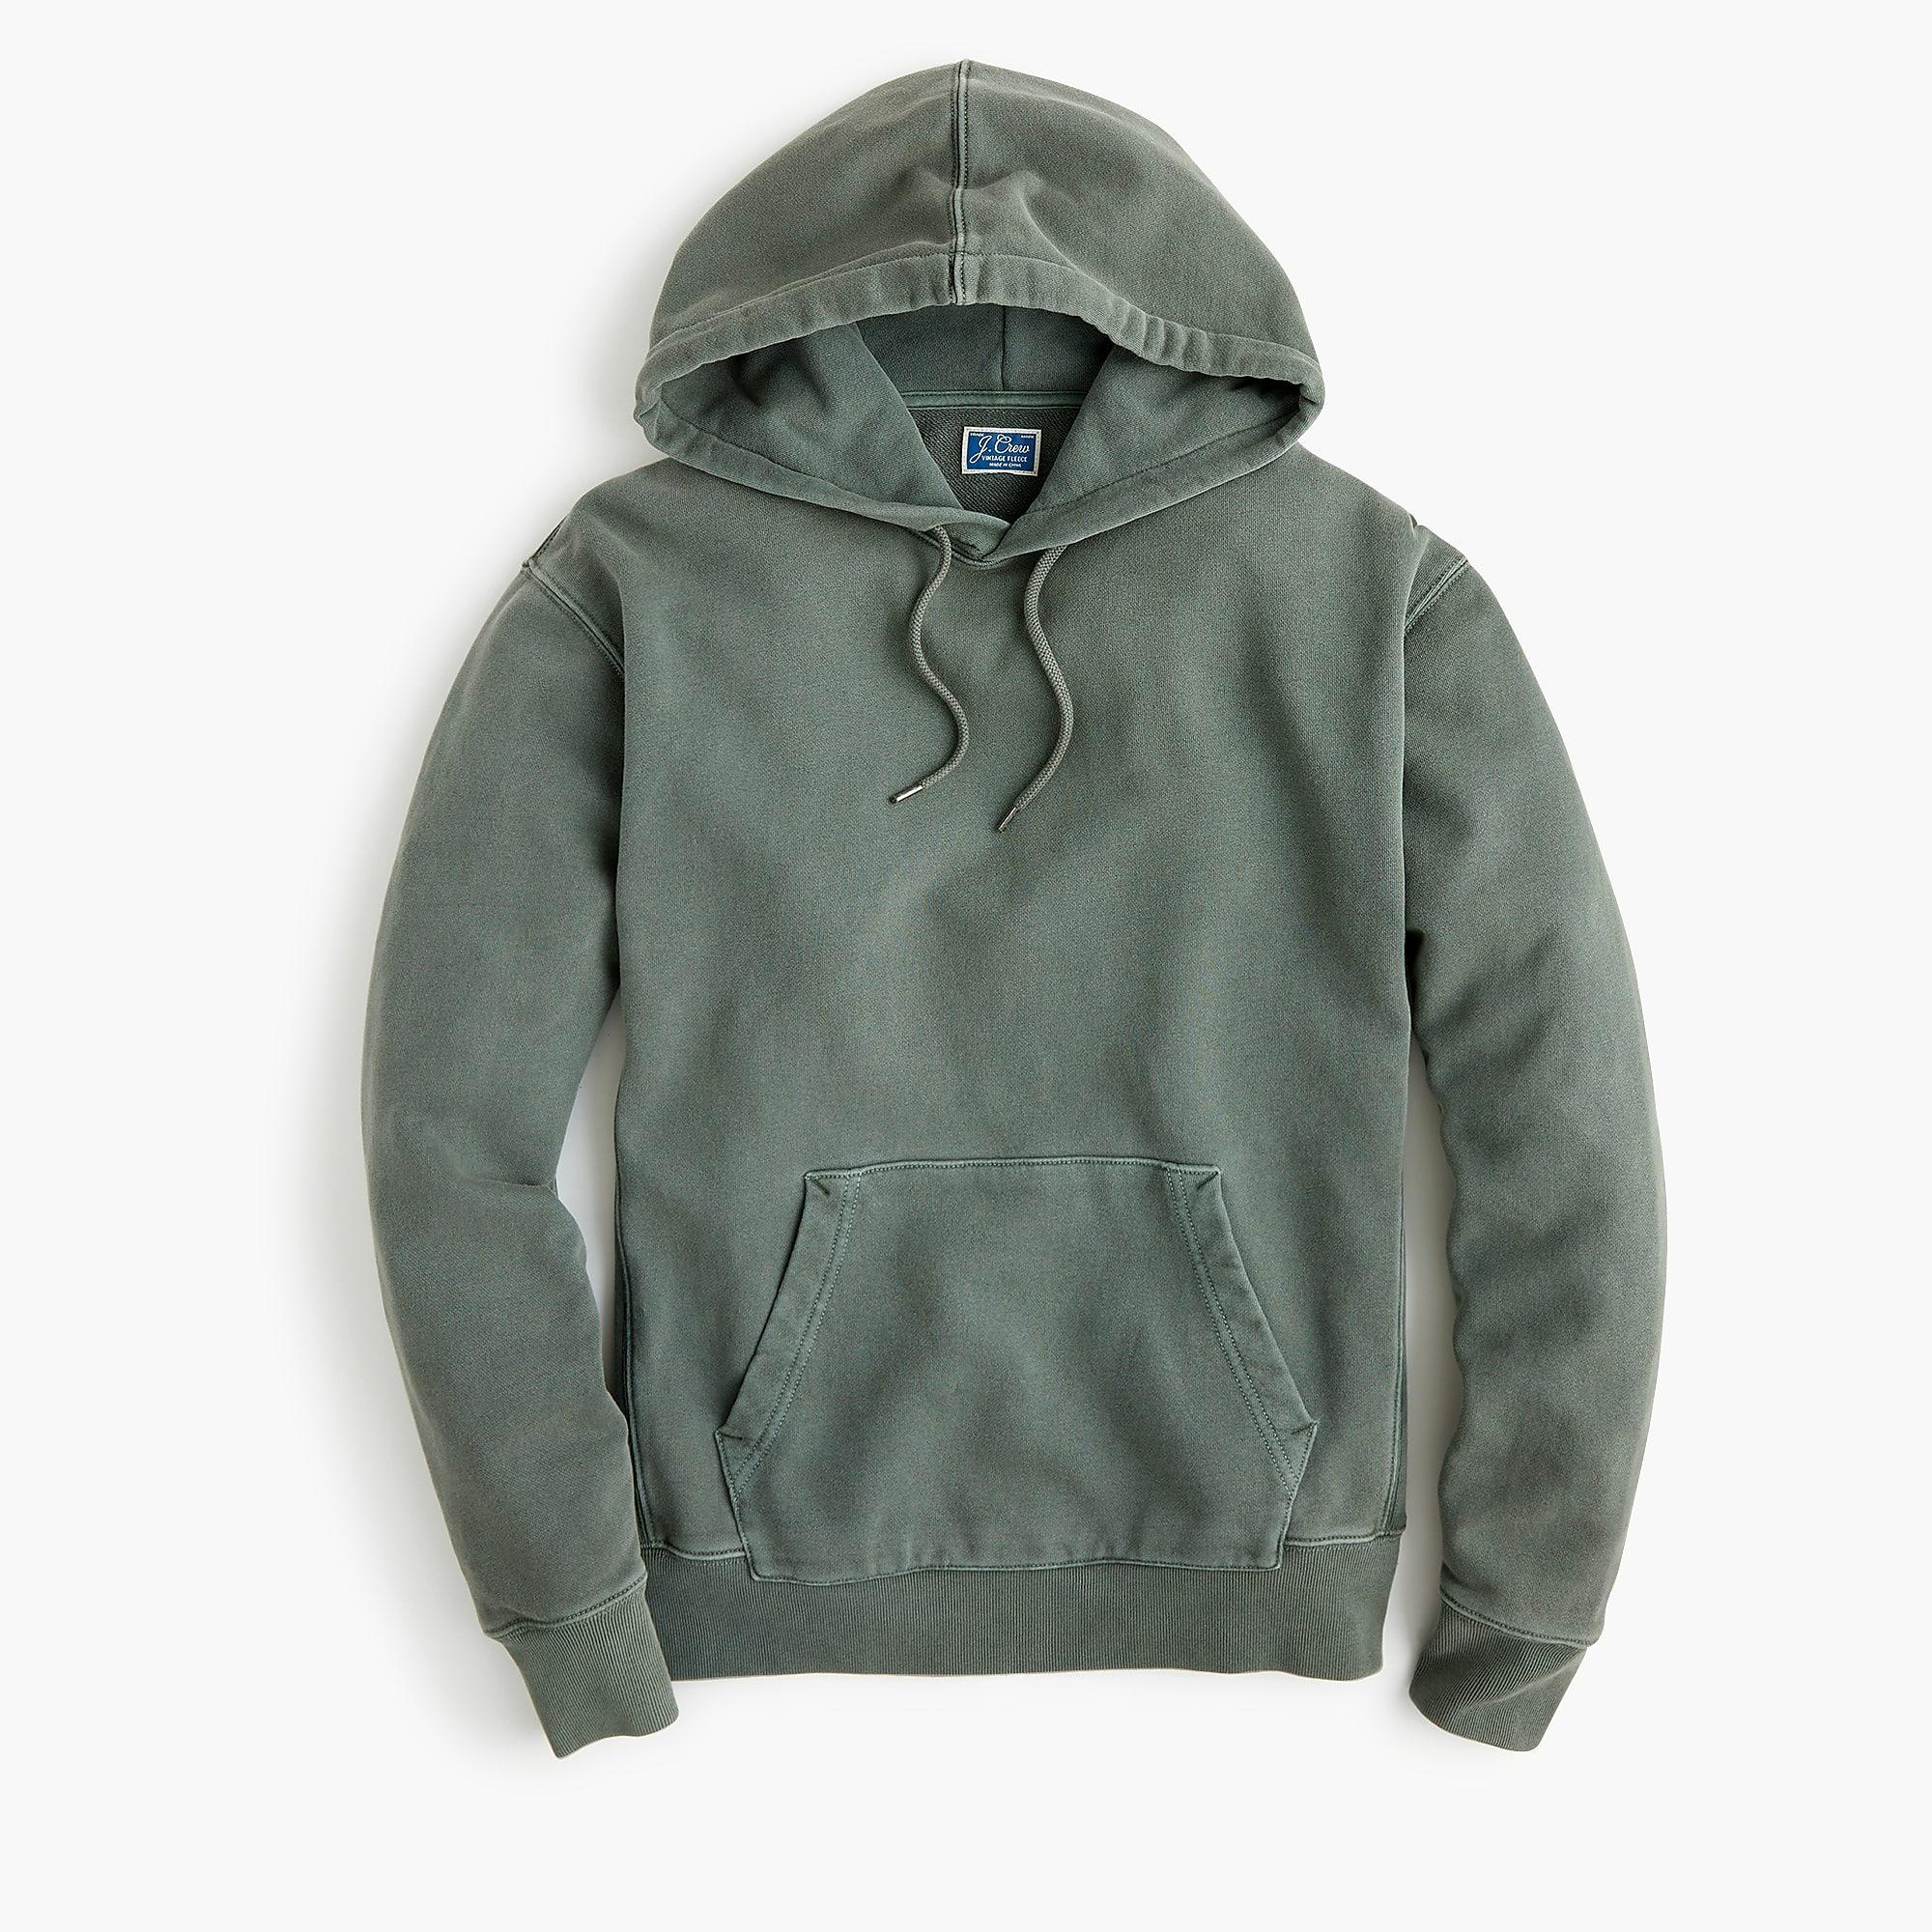 J.Crew Cotton Garment-dyed French Terry Hoodie in Green for Men - Lyst